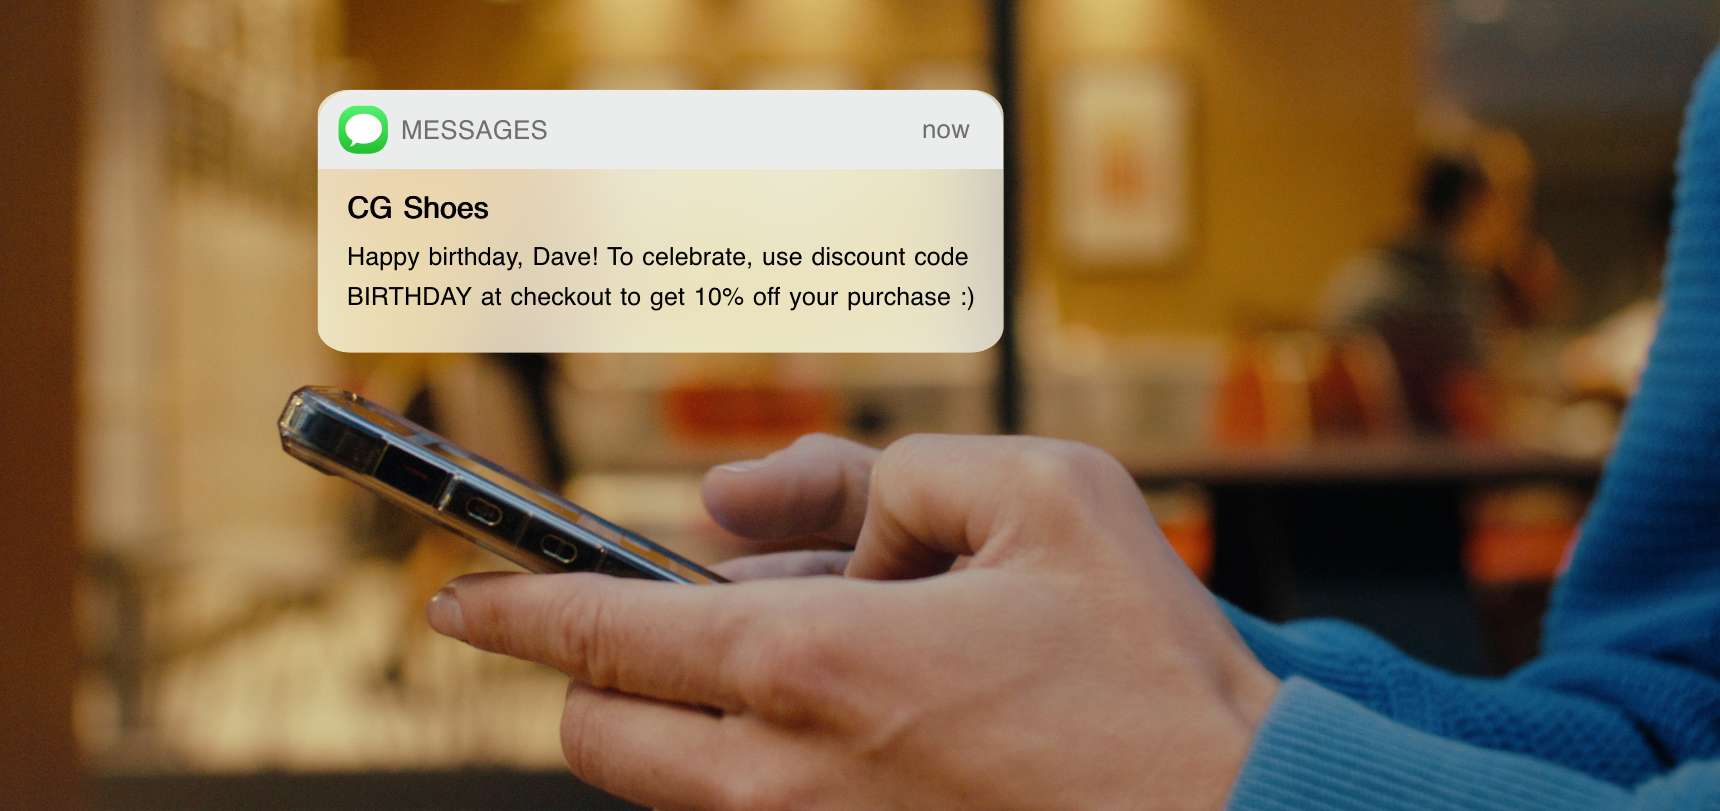 Personalized SMS marketing campaigns can help businesses increase customer lifetime value